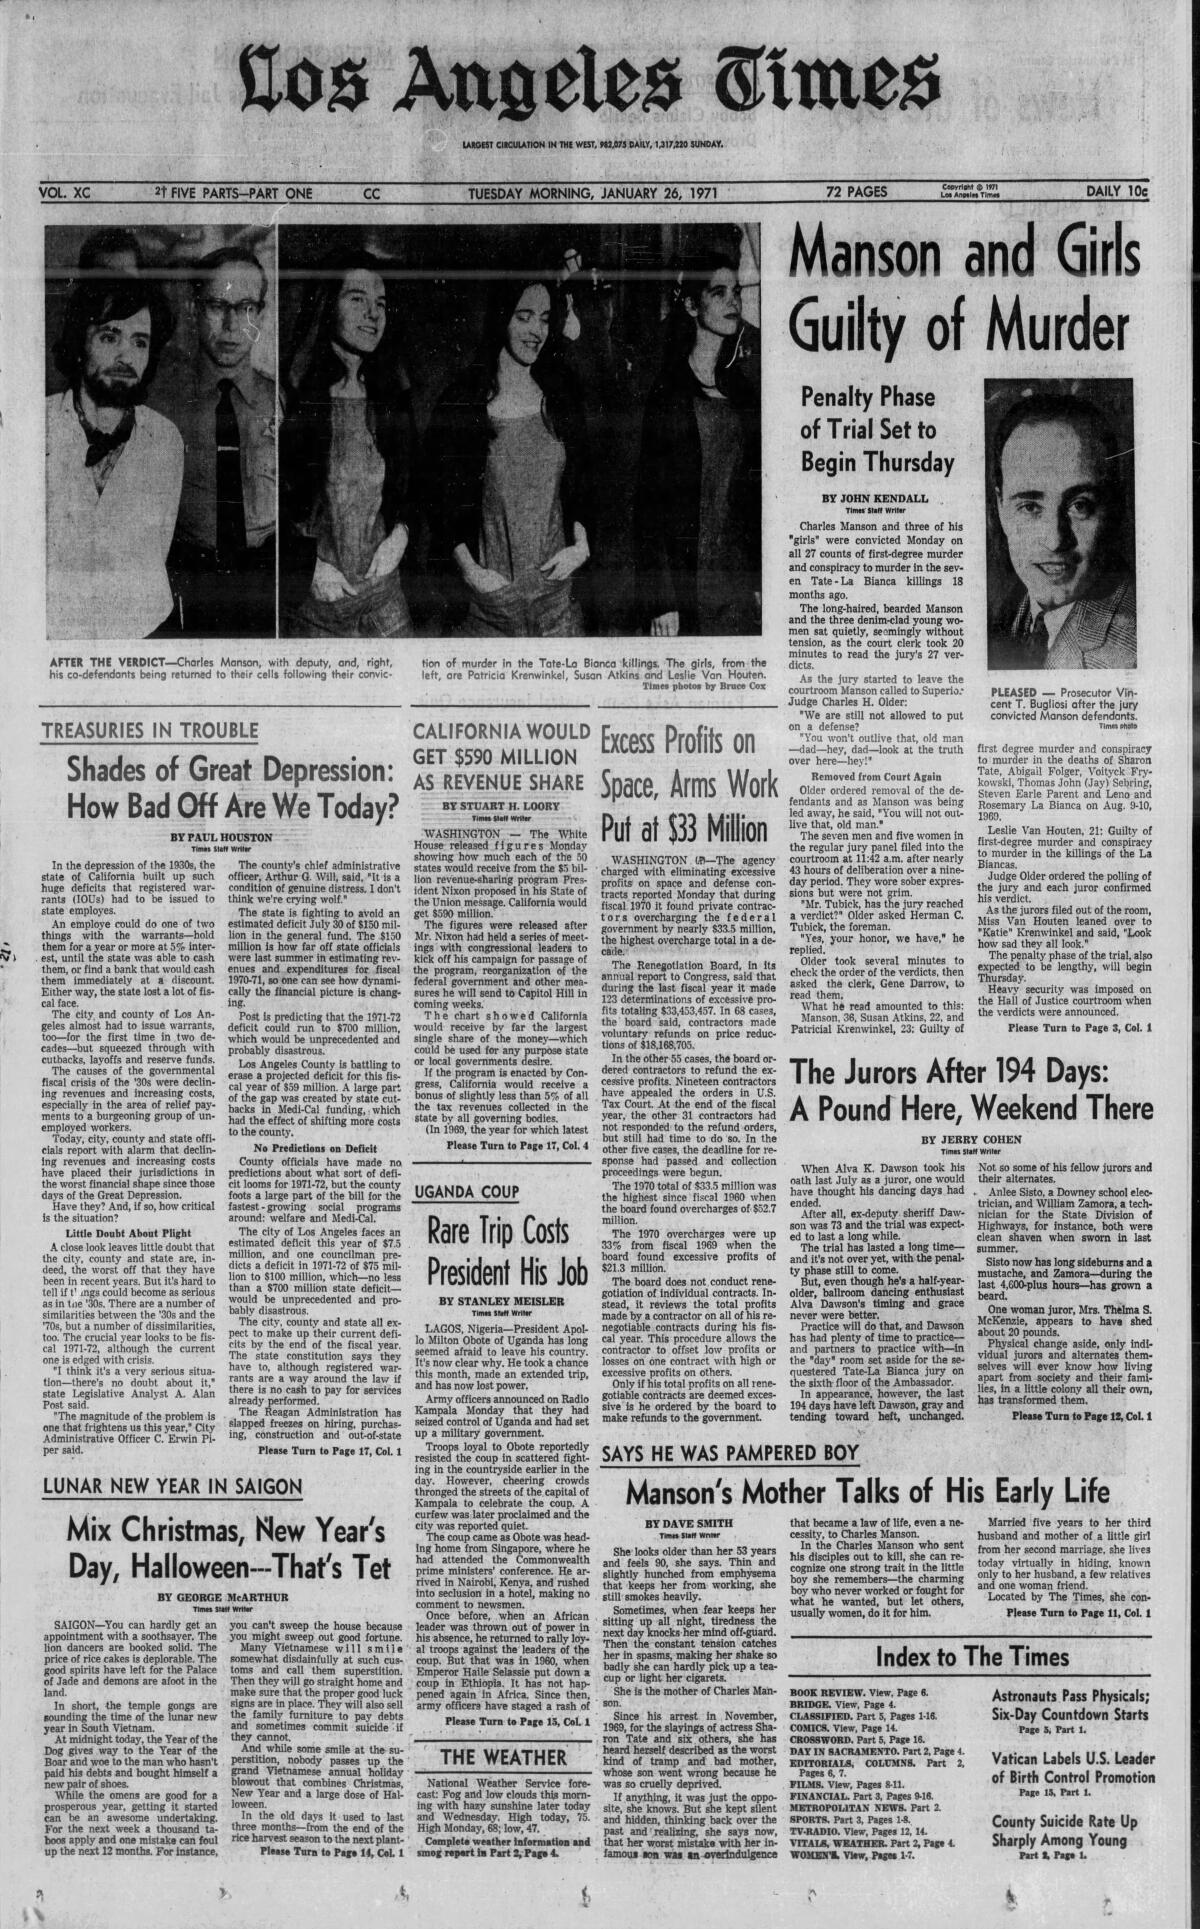 An image of a historical front page. 